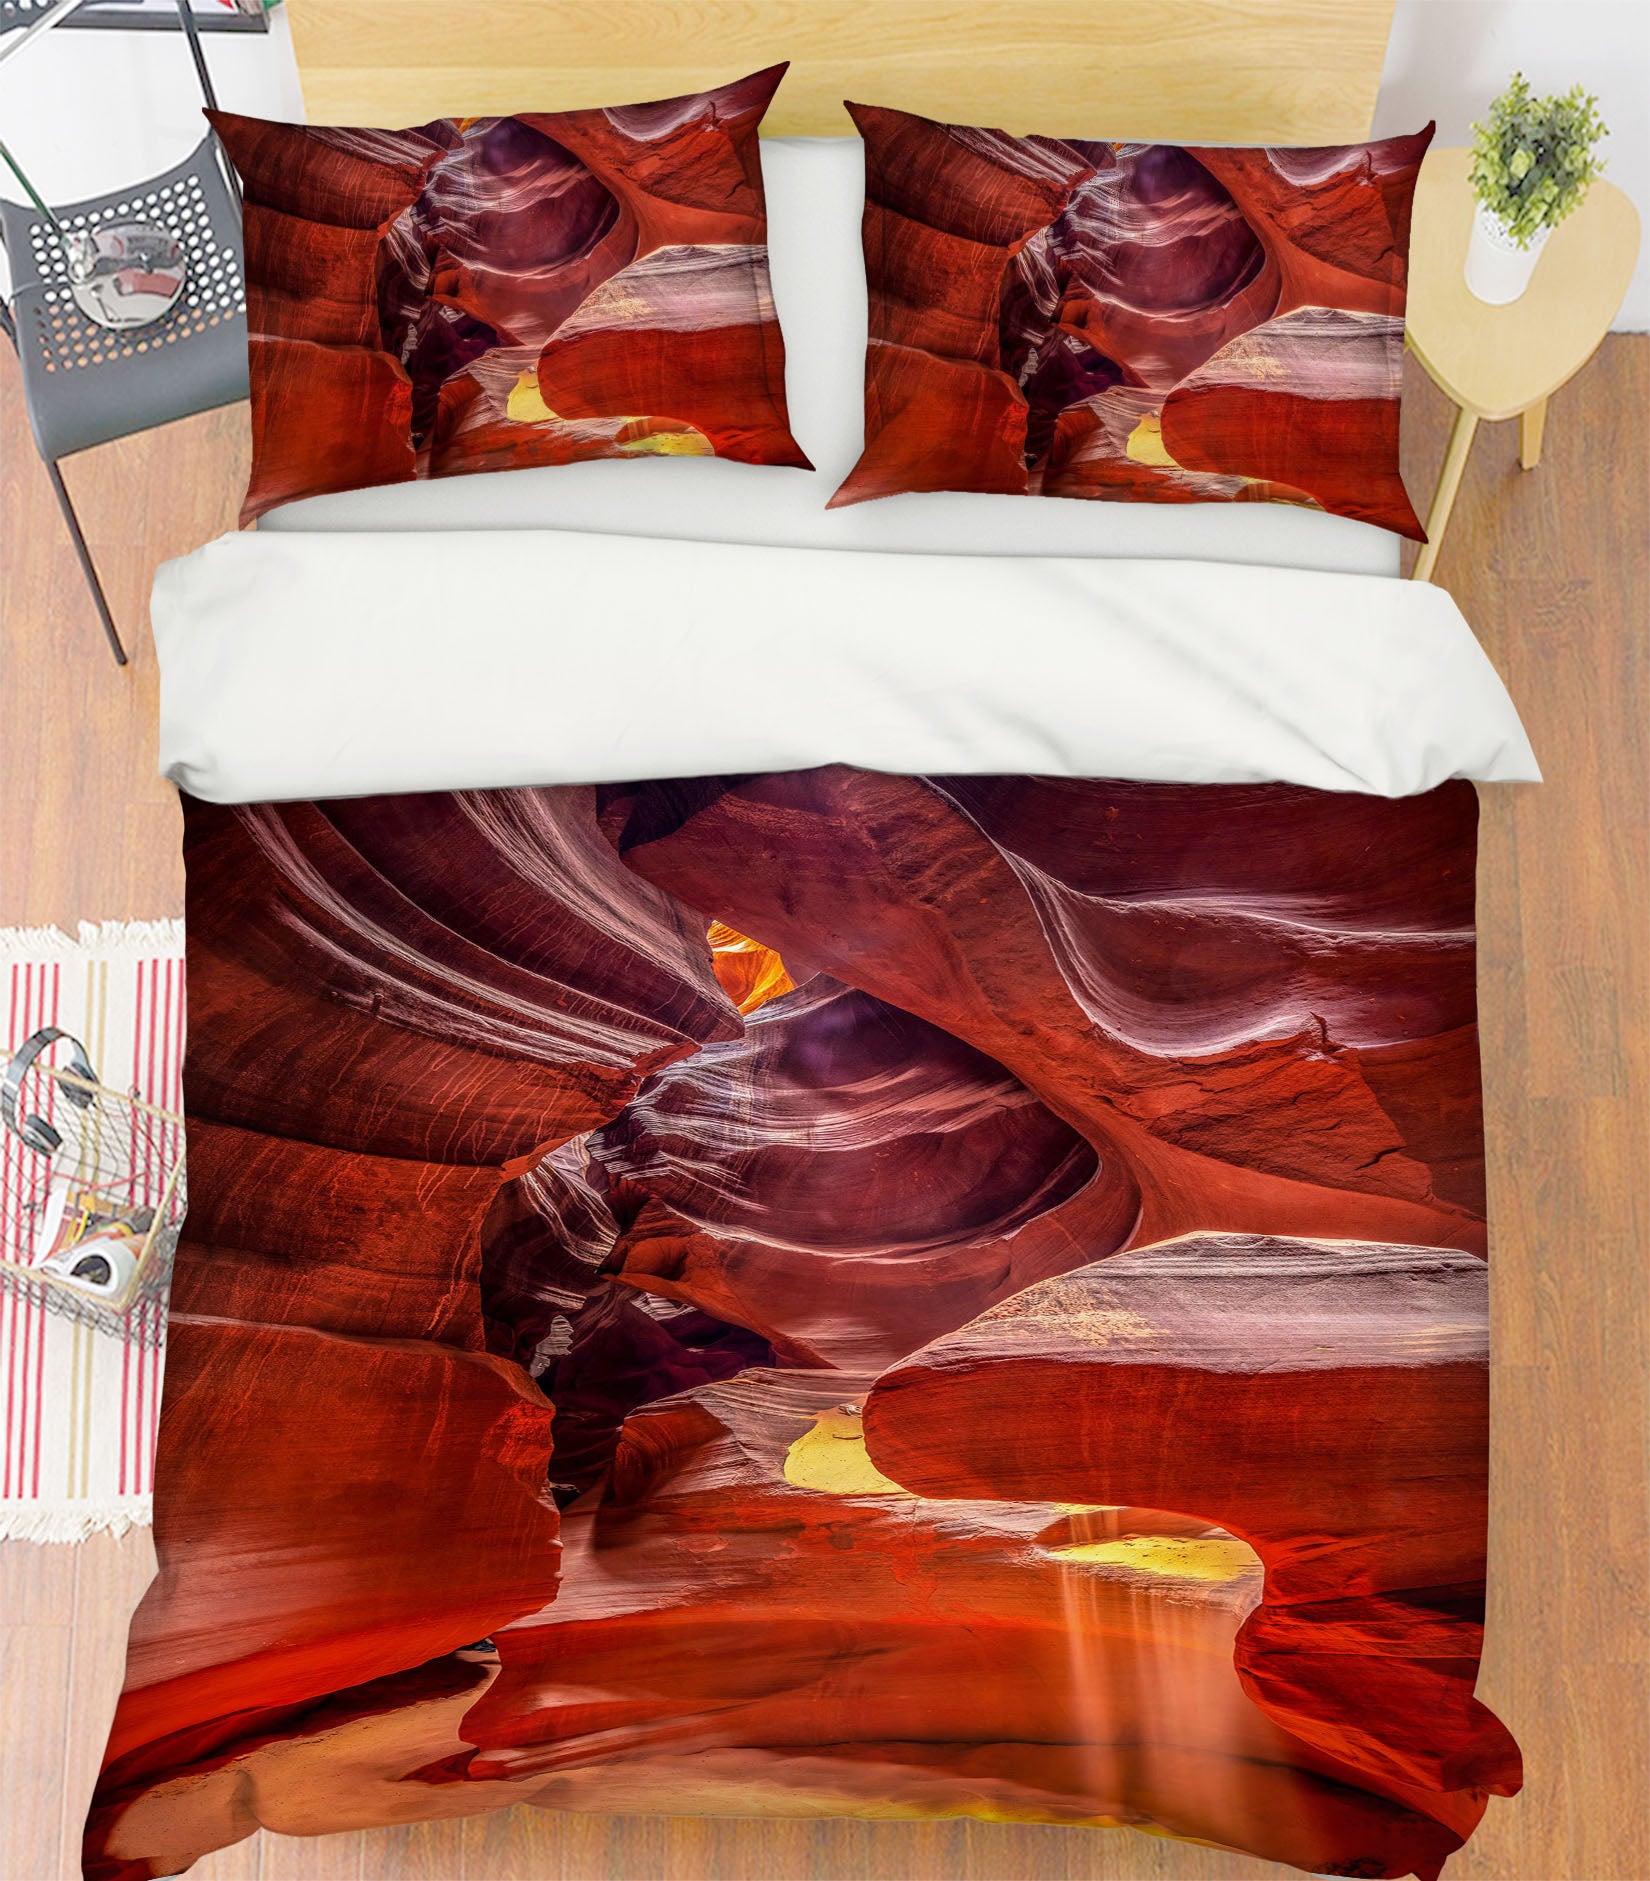 3D Gold Sand 030 Marco Carmassi Bedding Bed Pillowcases Quilt